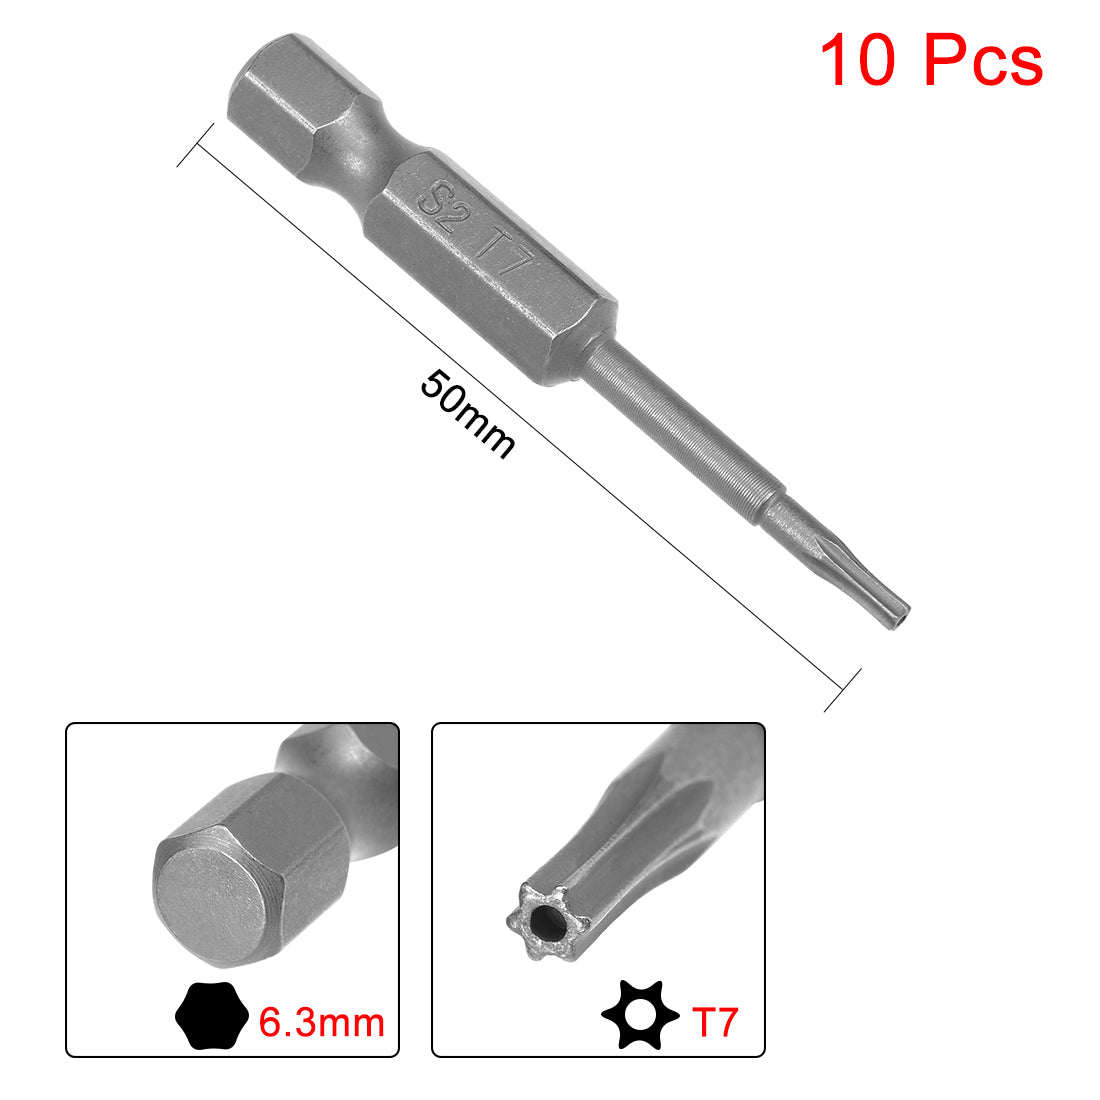 uxcell Uxcell Magnetic Torx Screwdriver Bits, Hex Shank S2 Security Tamper Proof Screw Driver Kit Tools